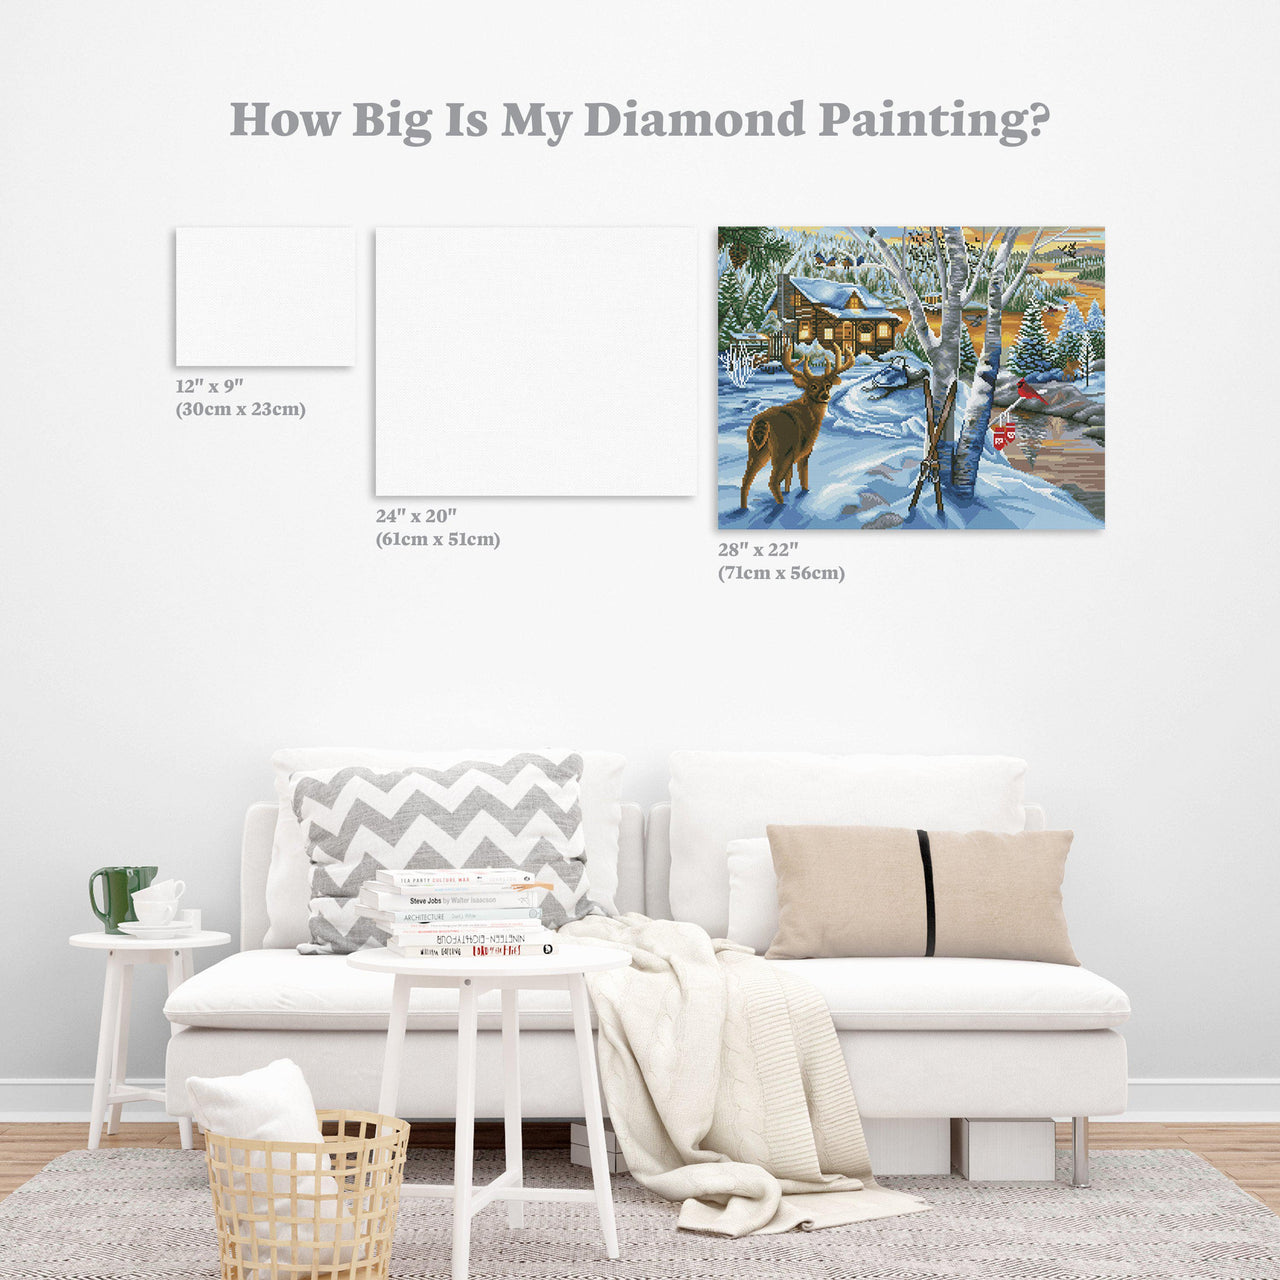 Diamond Painting Holiday Visitors 28" x 22″ (71cm x 56cm) / Round with 45 Colors including 2 ABs / 50,546